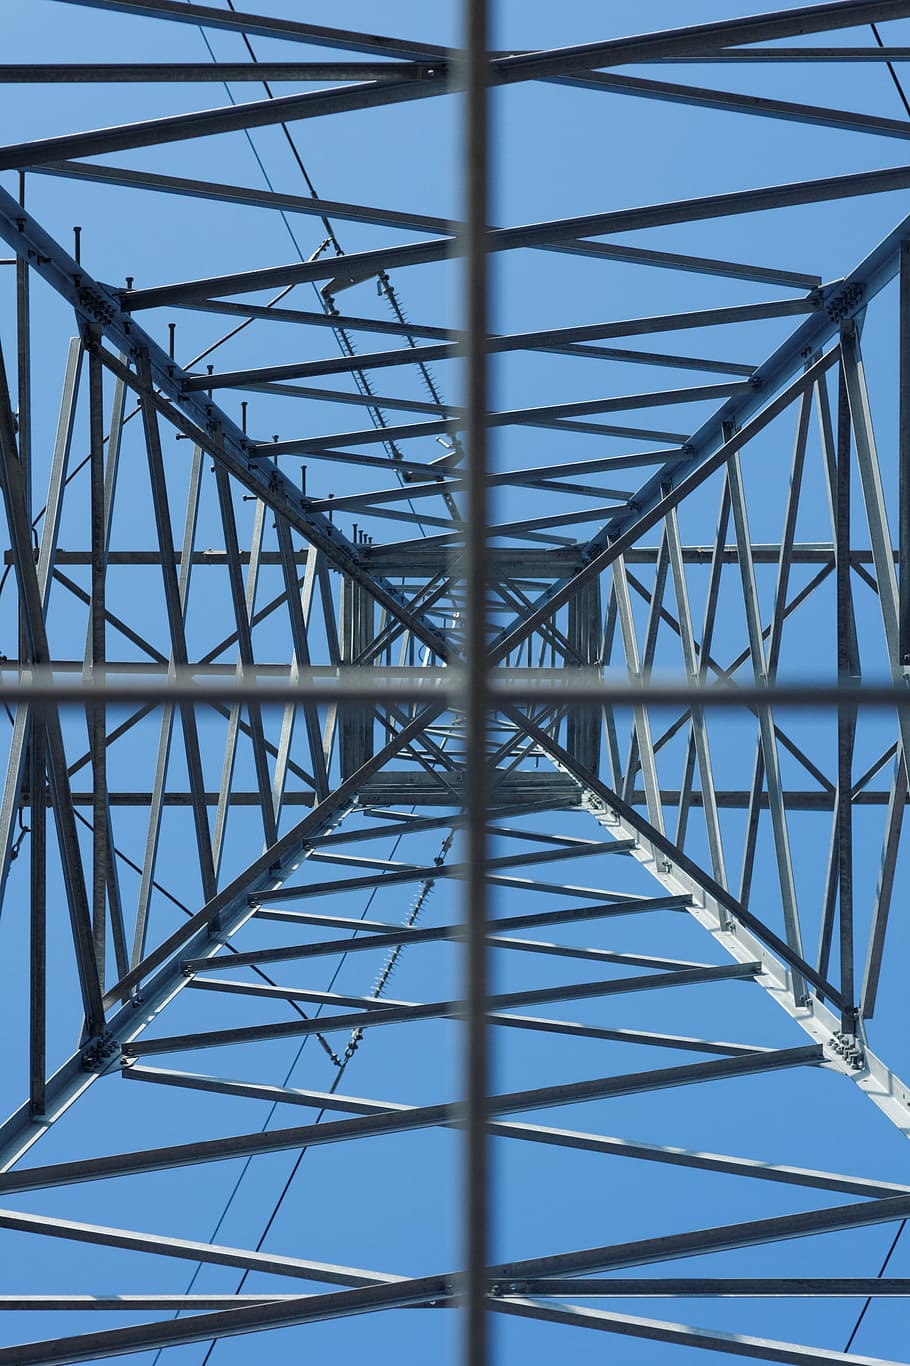 Electricity, Utility Pole, Structure, metal, perspective, power, voltage, electric, high, industrial